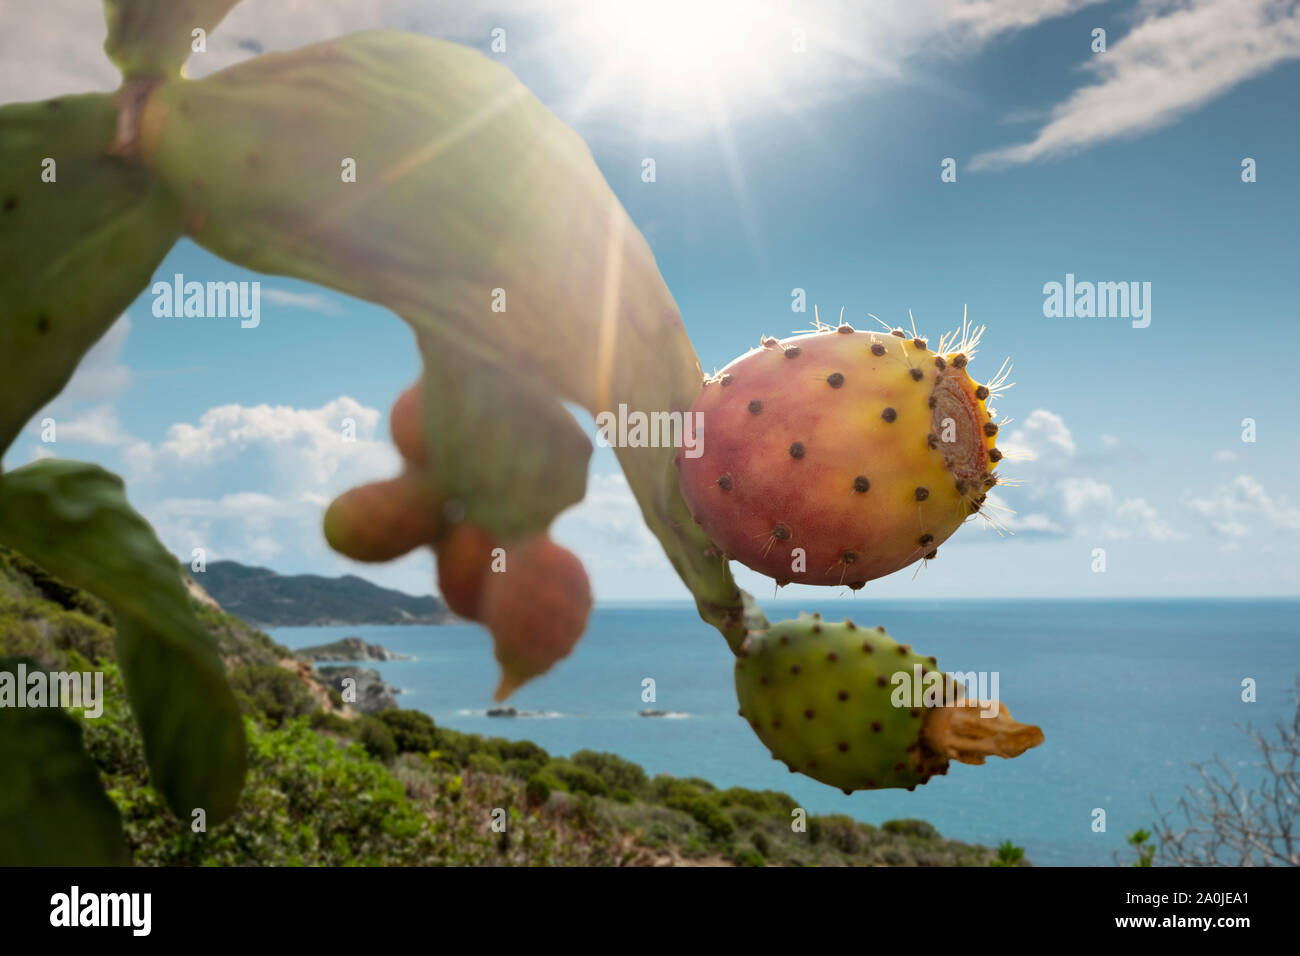 cactus branch with prickly pears, with sunny seascape background Stock Photo